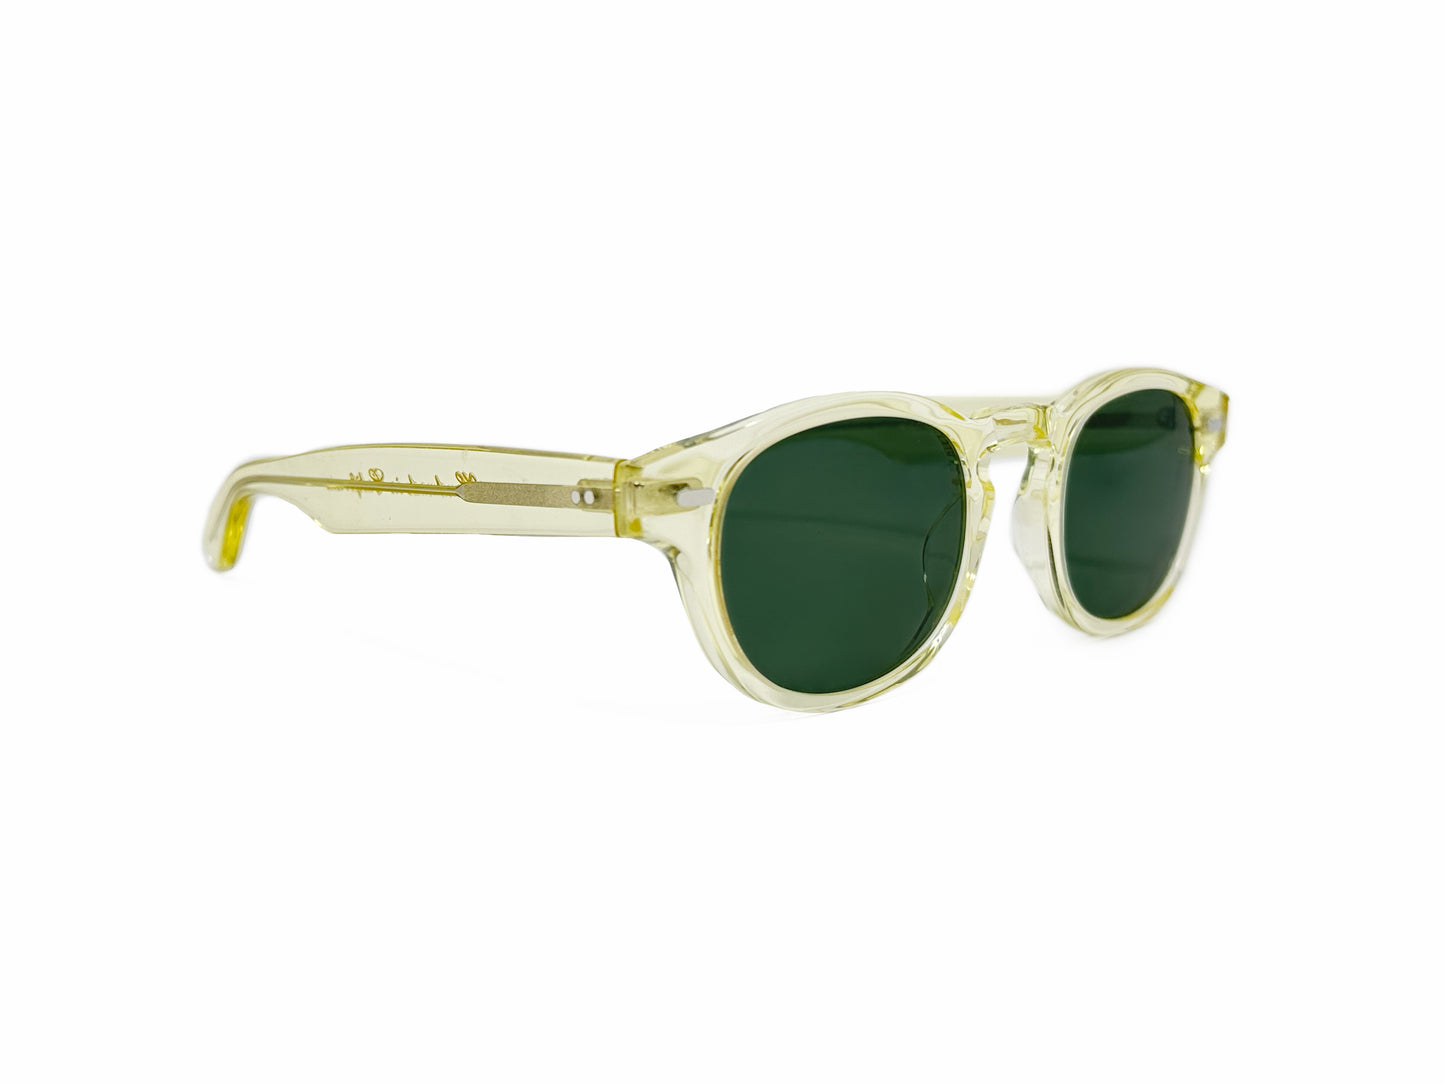 Kala Eyewear rounded acetate sunglass. Model: Kalifornia. Color: CHP - Transparent with a hint of yellow. Side view.